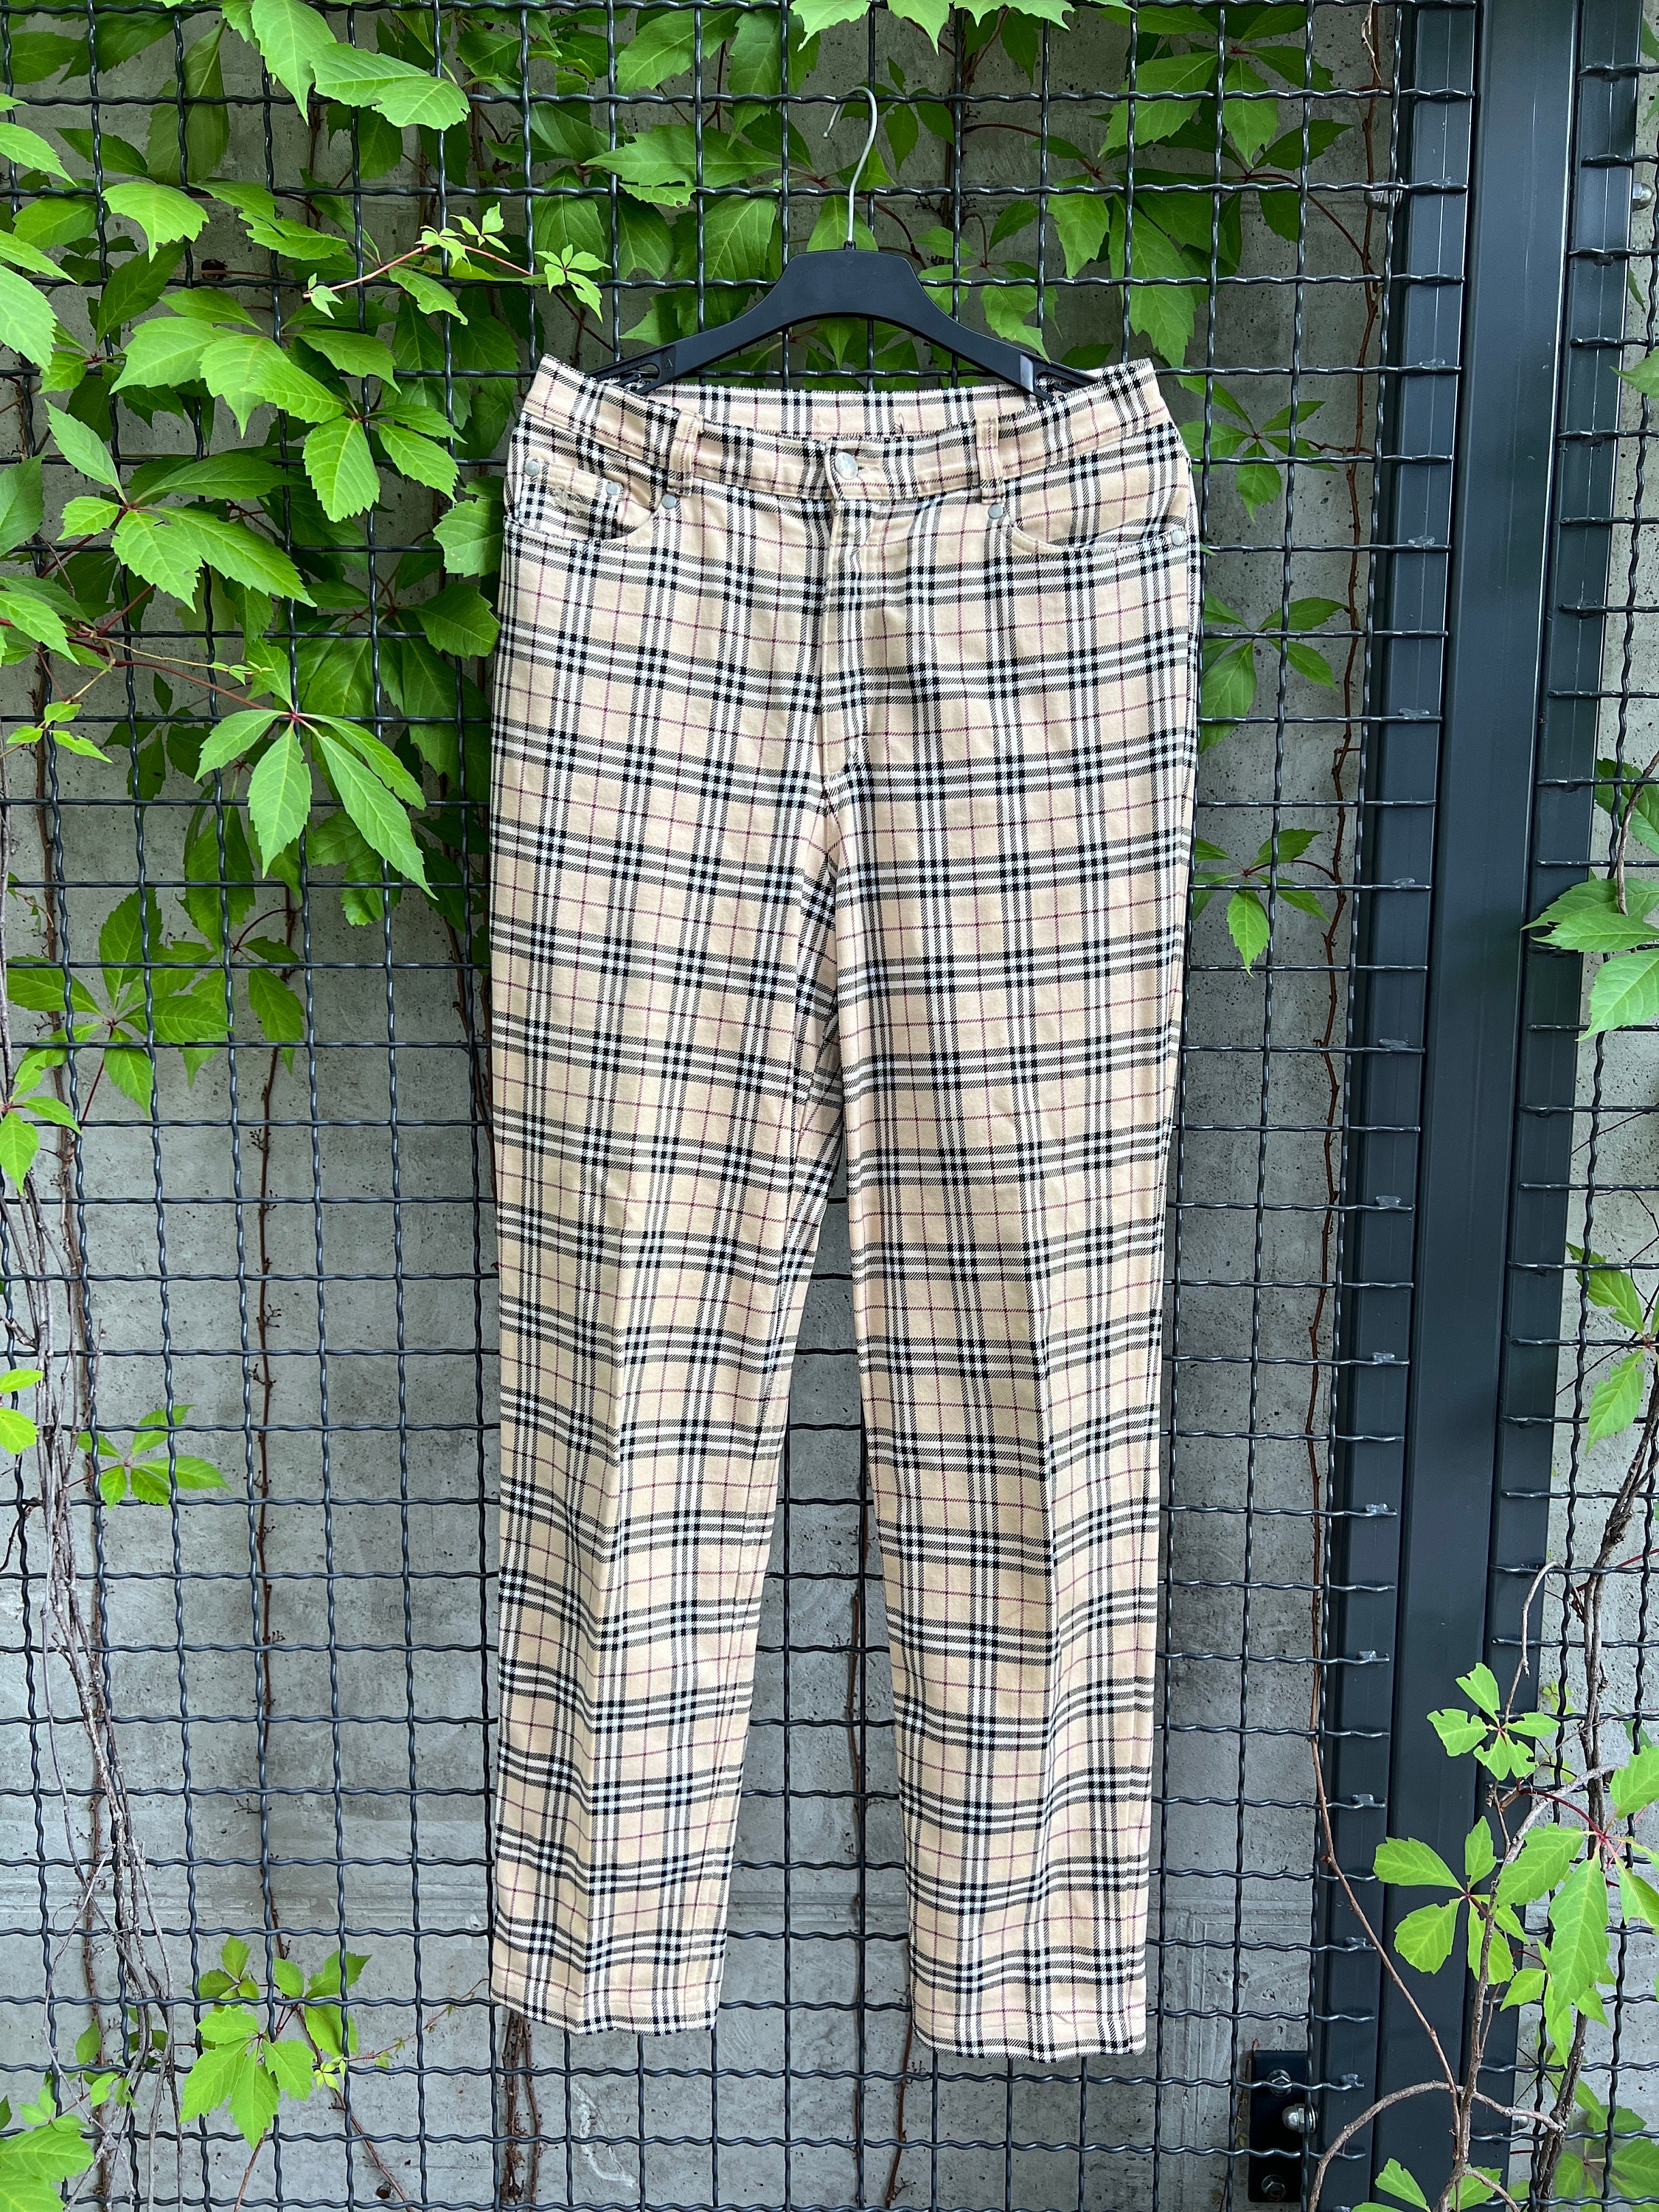 Shop Burberry Printed Pants Other Plaid Patterns Unisex Nylon 8070288  A7026 188391487 by selectme38  BUYMA